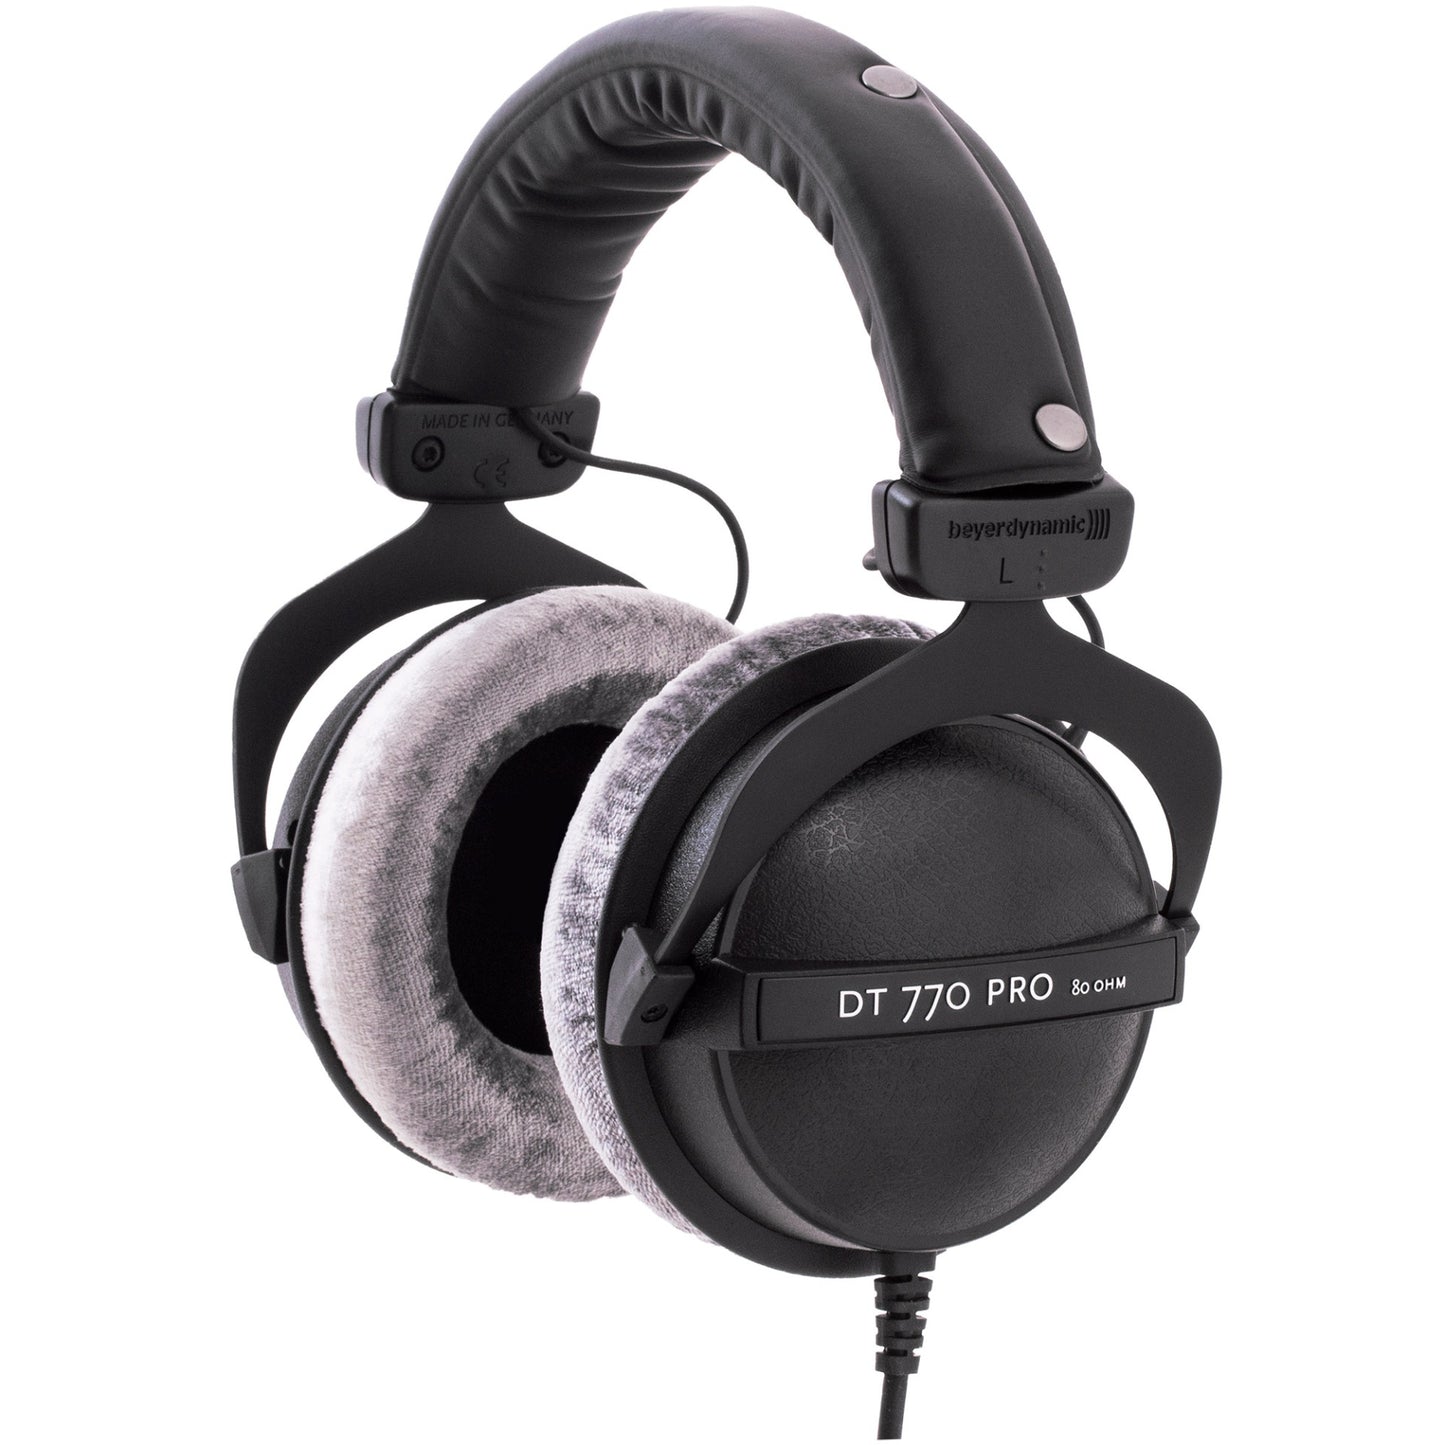  beyerdynamic DT 770 PRO 250 Ohm Over-Ear Studio Headphones in  Black. Closed Construction, Wired for Studio use, Ideal for Mixing in The  Studio : Musical Instruments